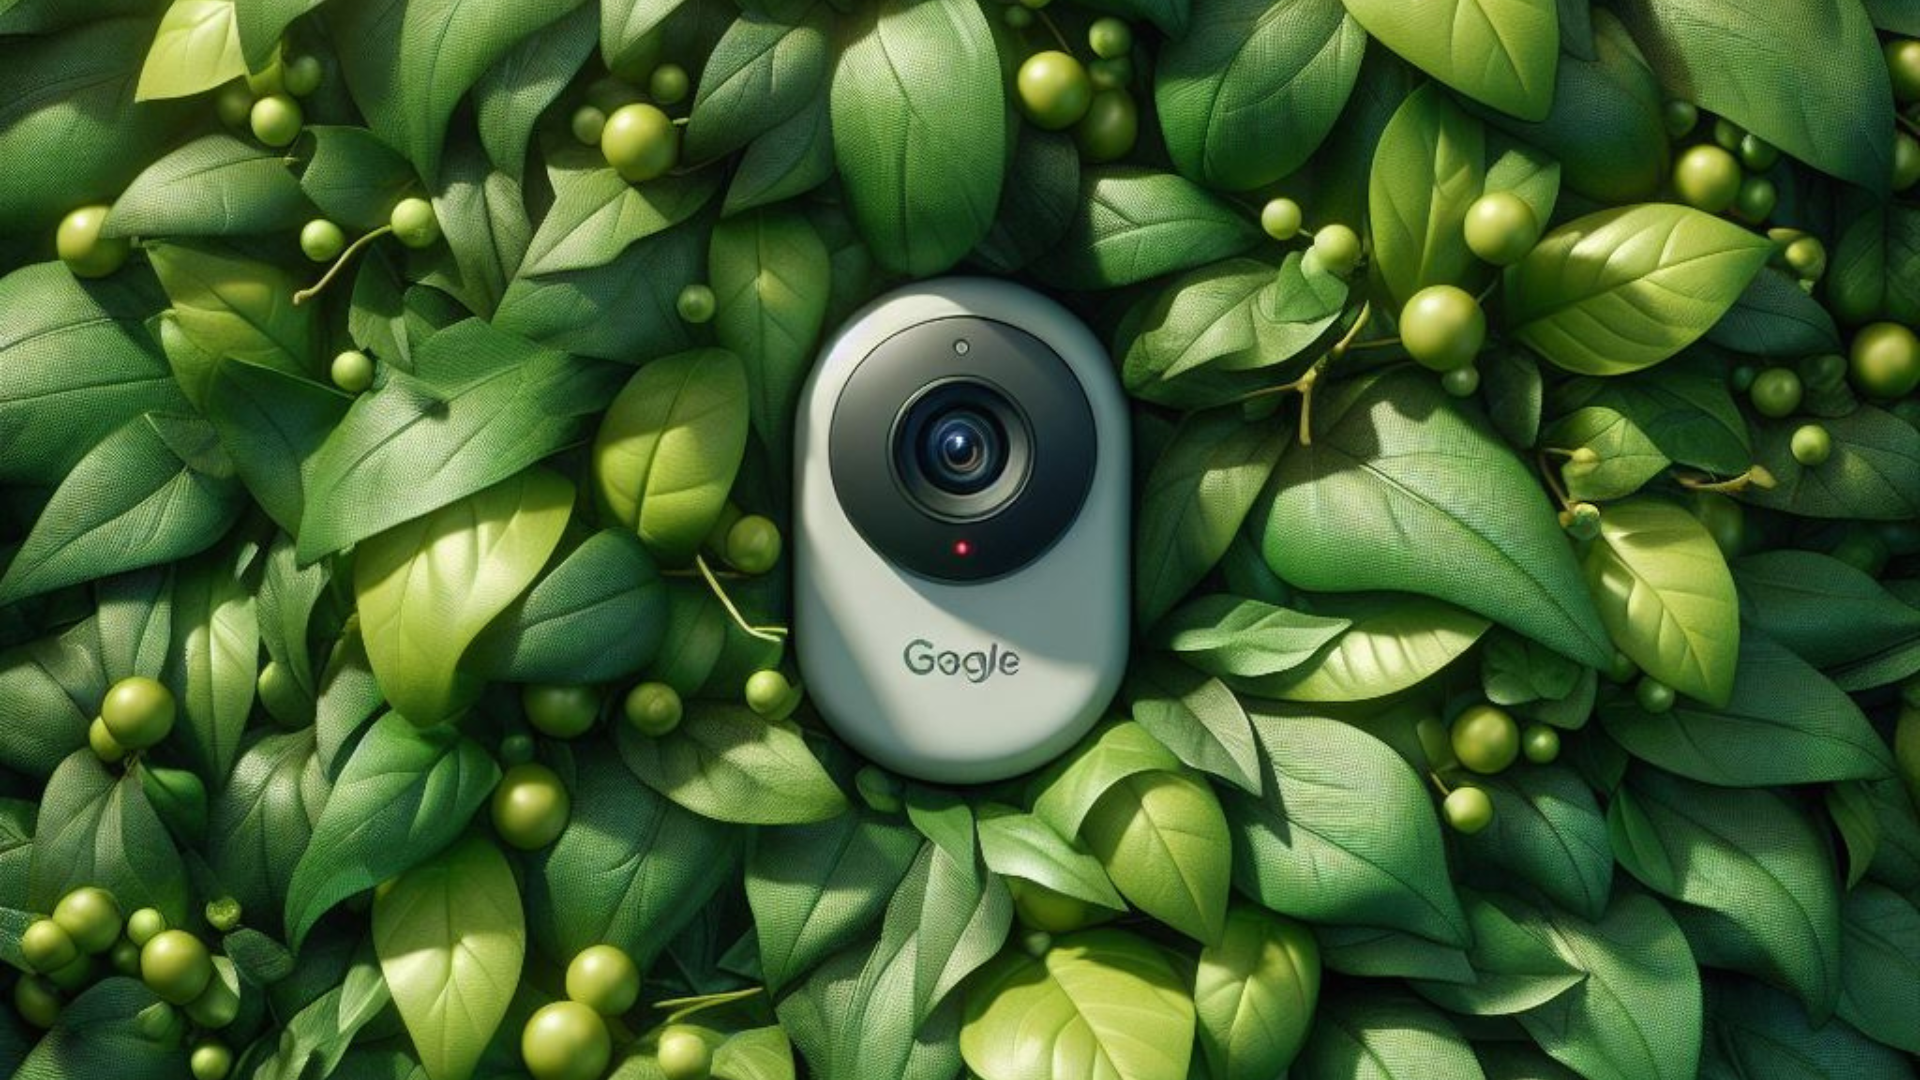 Learn how to discreetly conceal your Google Nest Cam for privacy and security with these expert tips and strategies. Keep intruders at bay while maintaining surveillance.